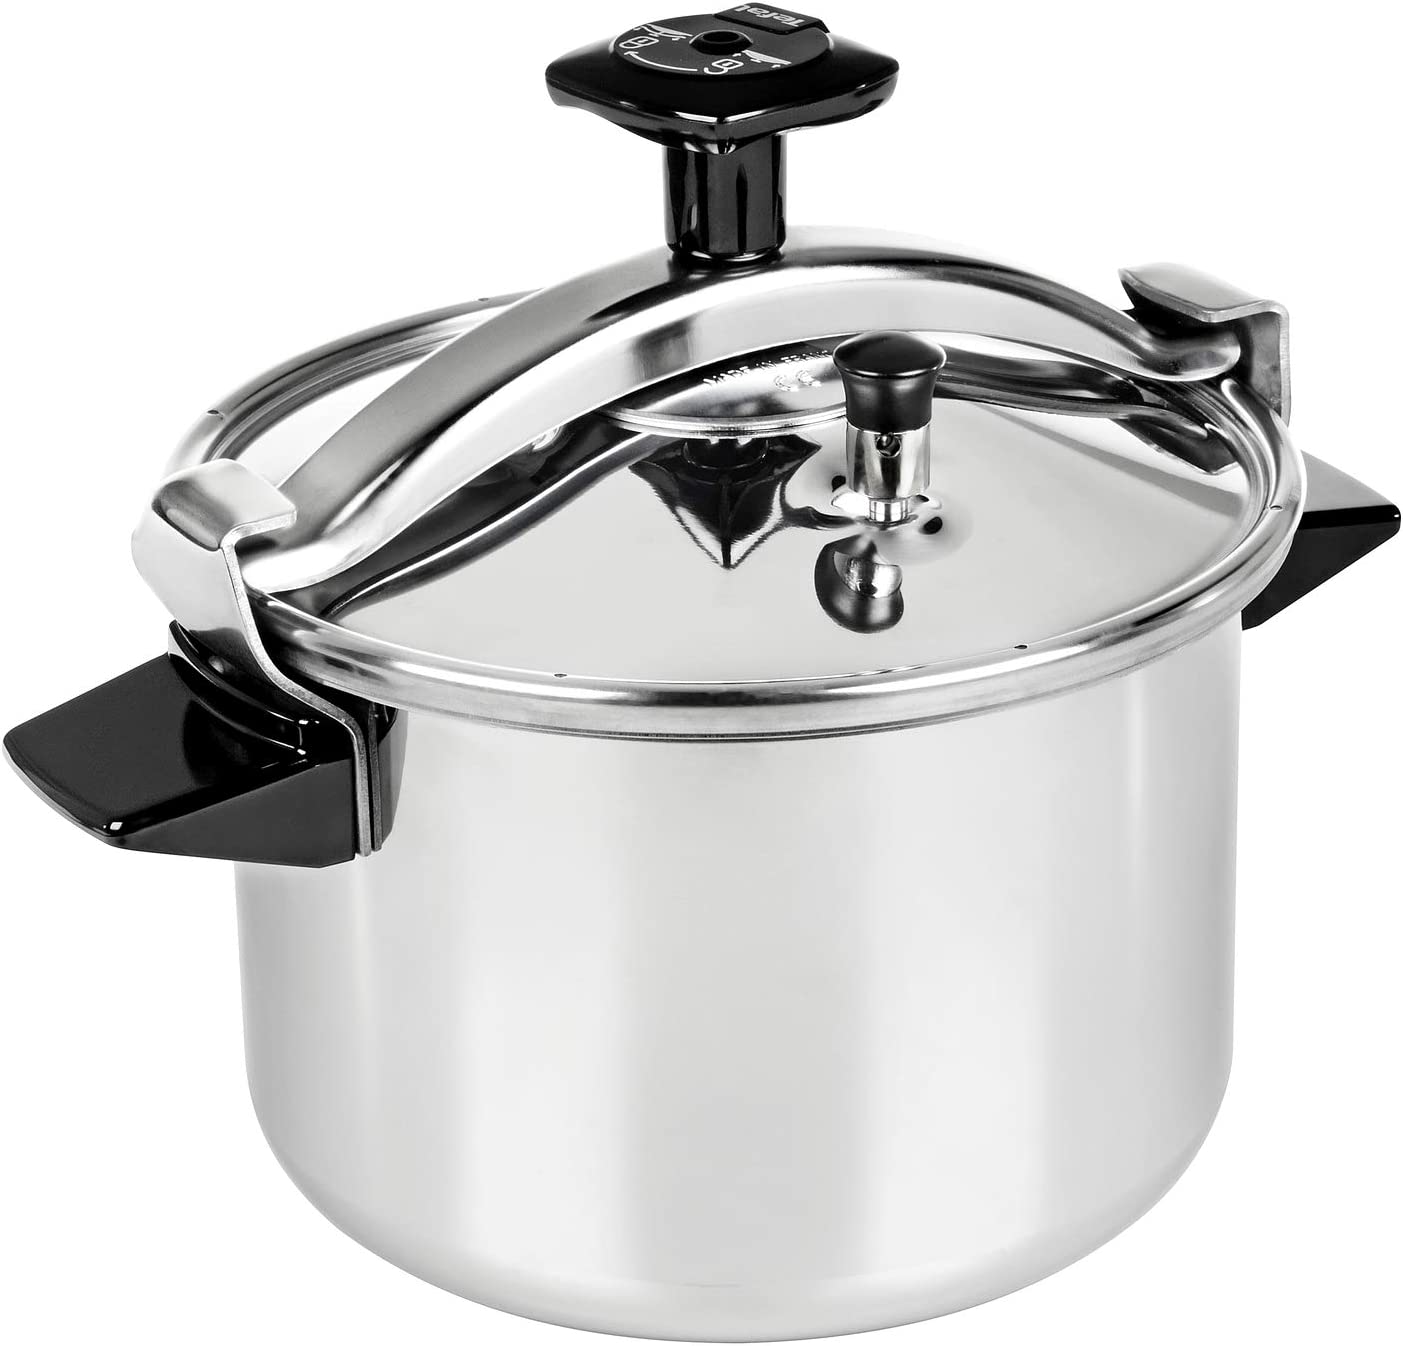 Cocotte SEB Minute A Induction 6L - Inox - Electro Chaabani vente